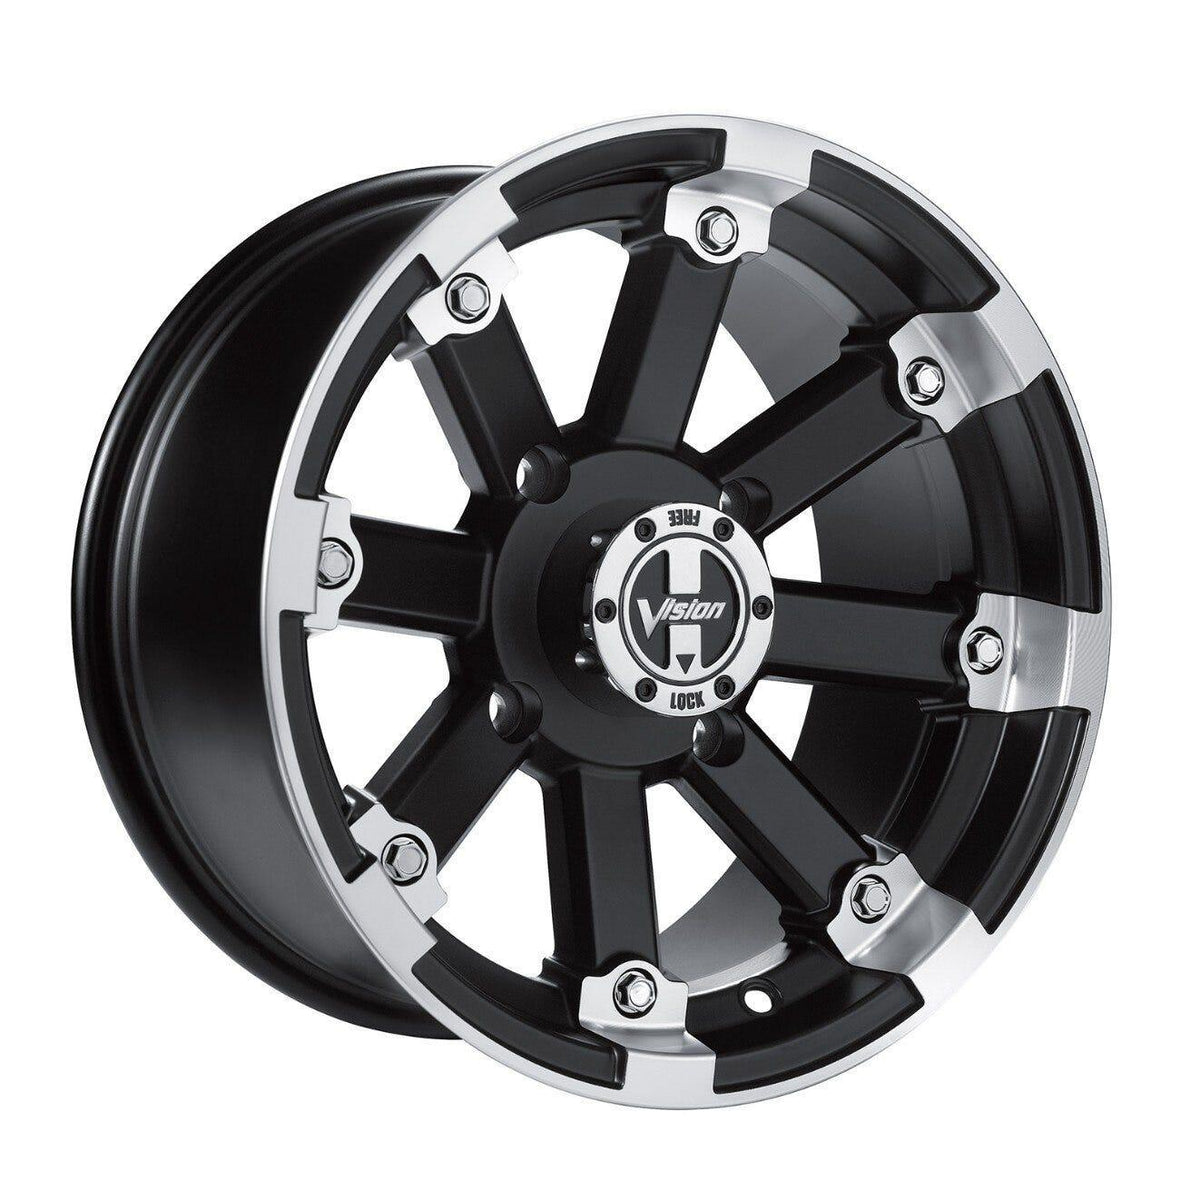 Lockout 393 14&quot; Rim by Vision - Rear